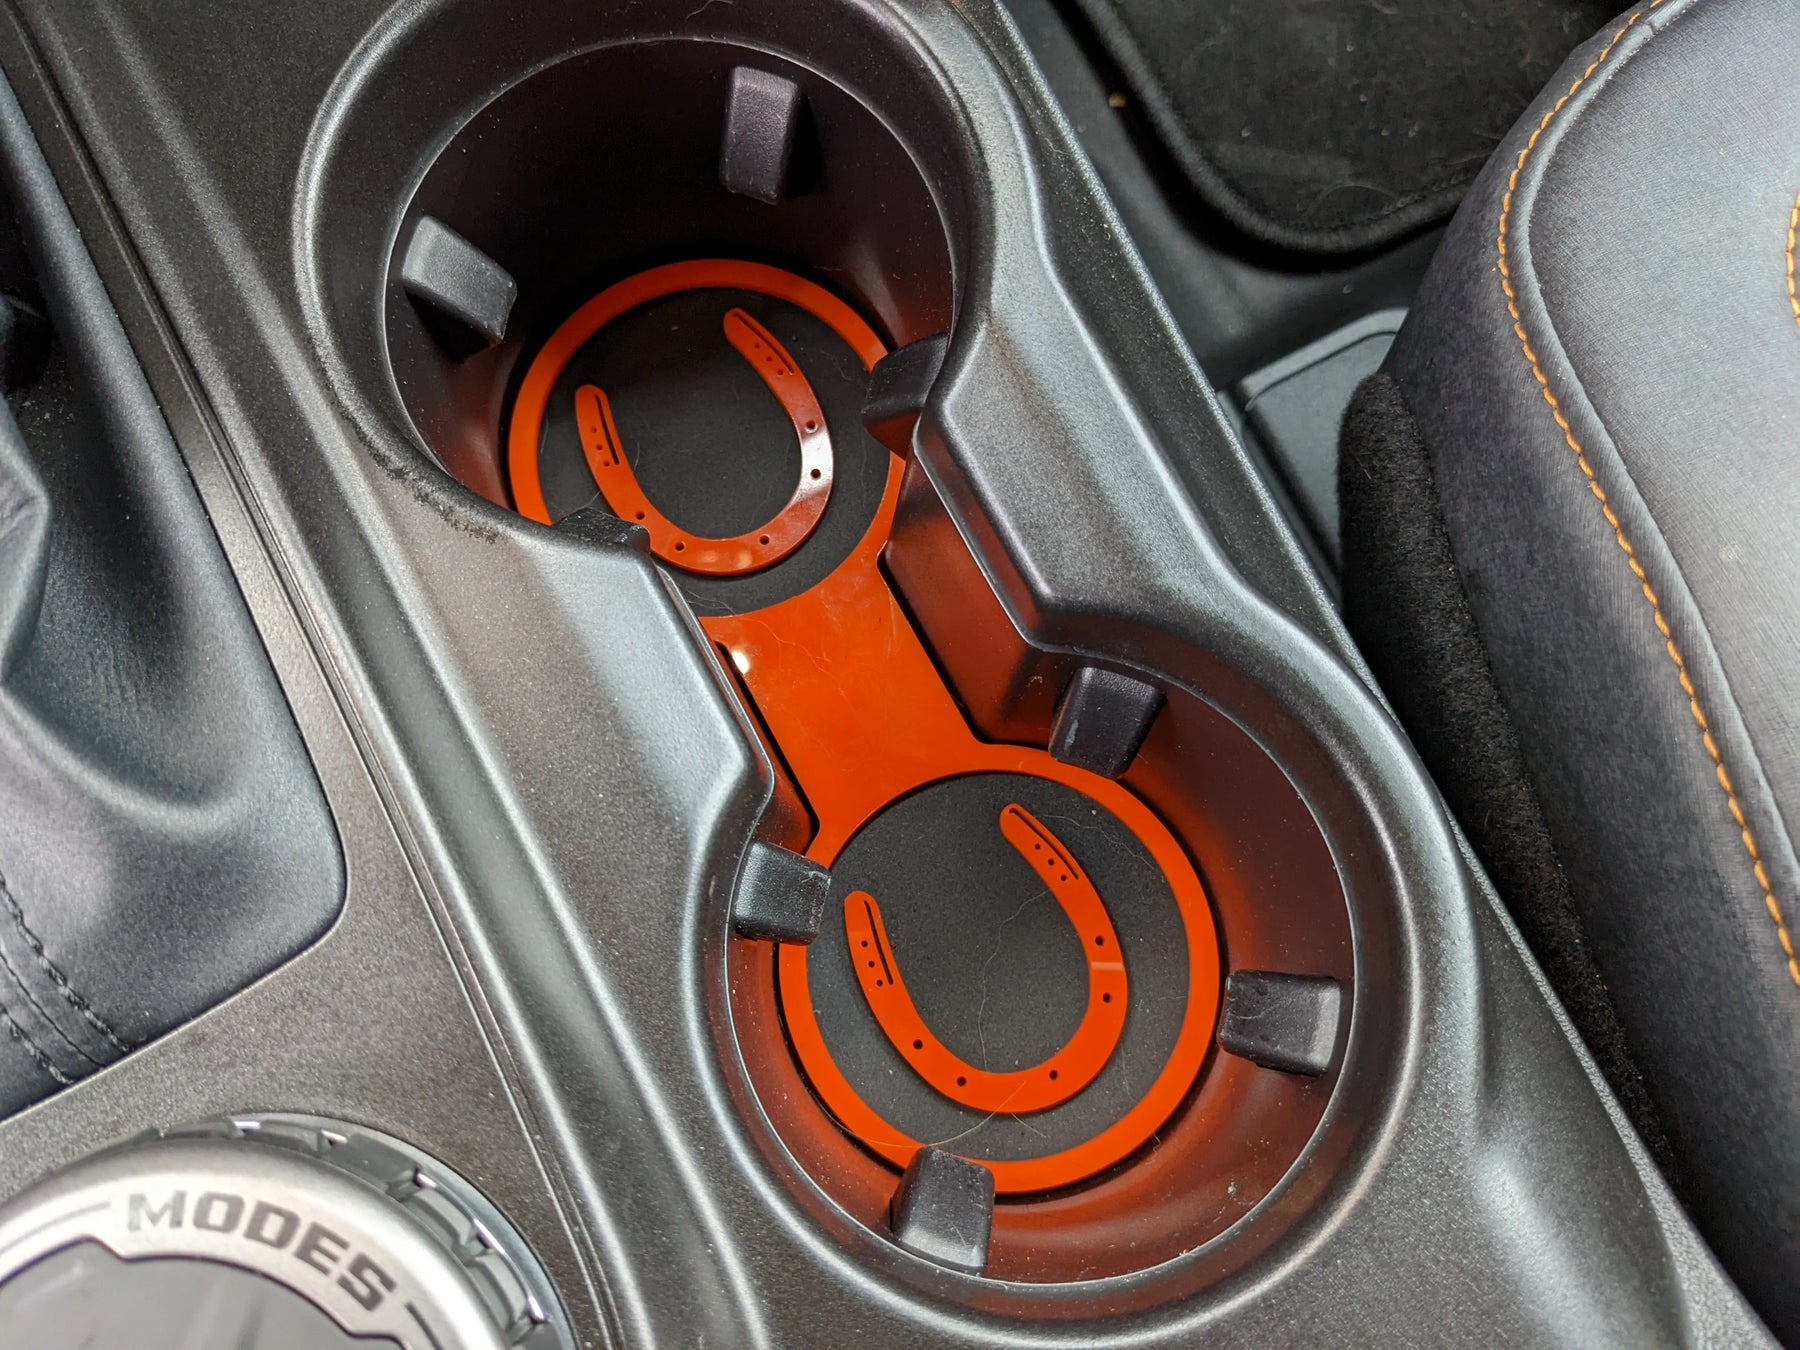 Horseshoe Cupholder Insert - Fits 2021+ Bronco® - Multiple Colors Available